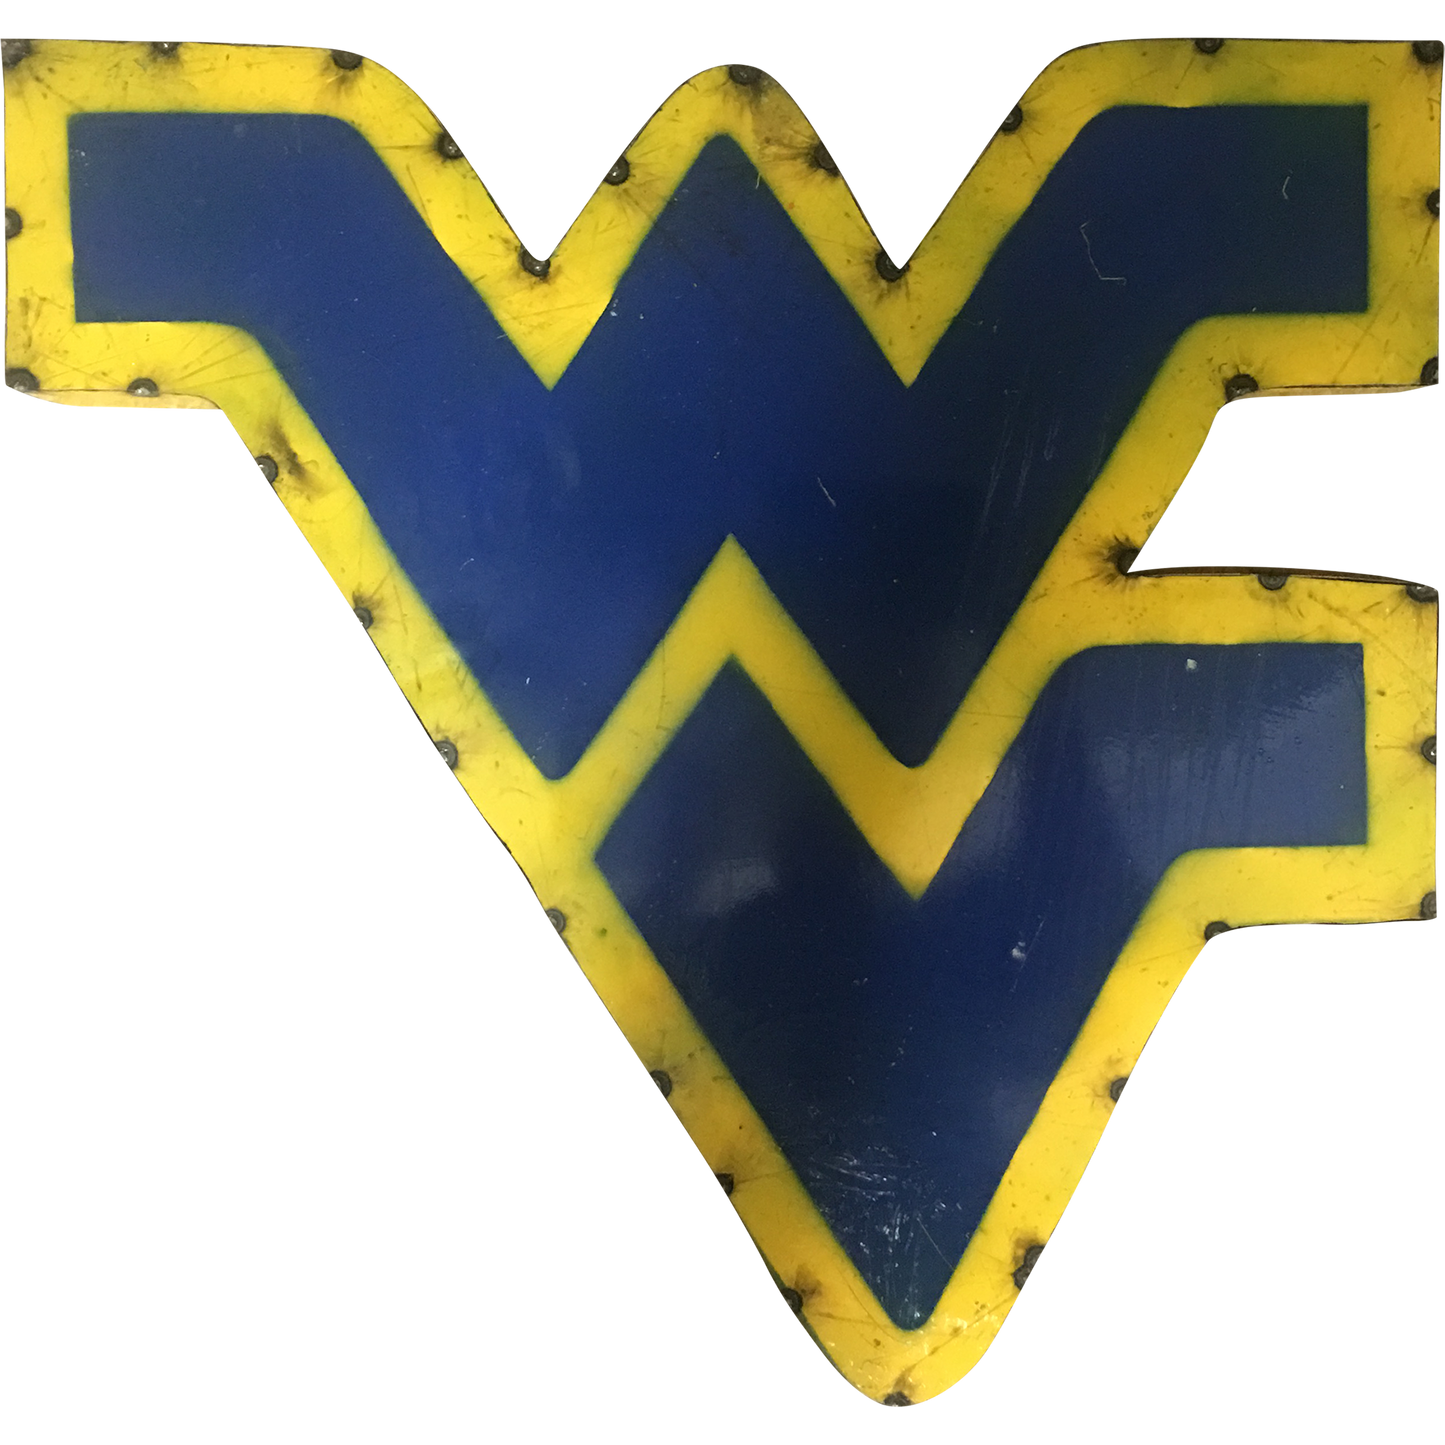 West Virginia "WV" Logo Recycled Metal Wall Decor